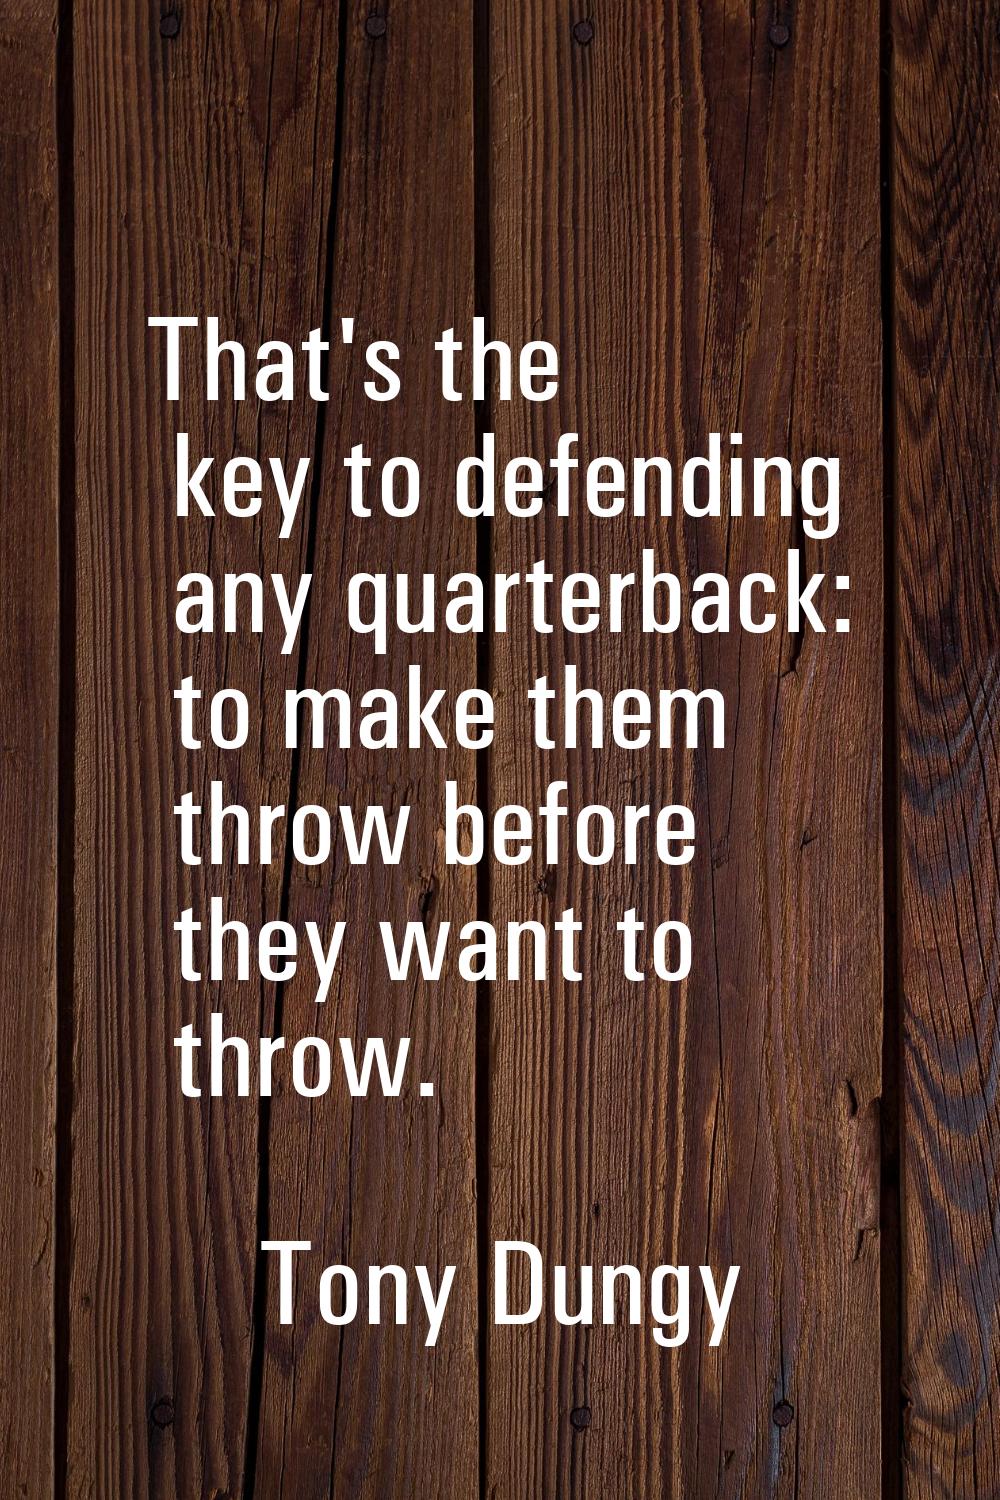 That's the key to defending any quarterback: to make them throw before they want to throw.